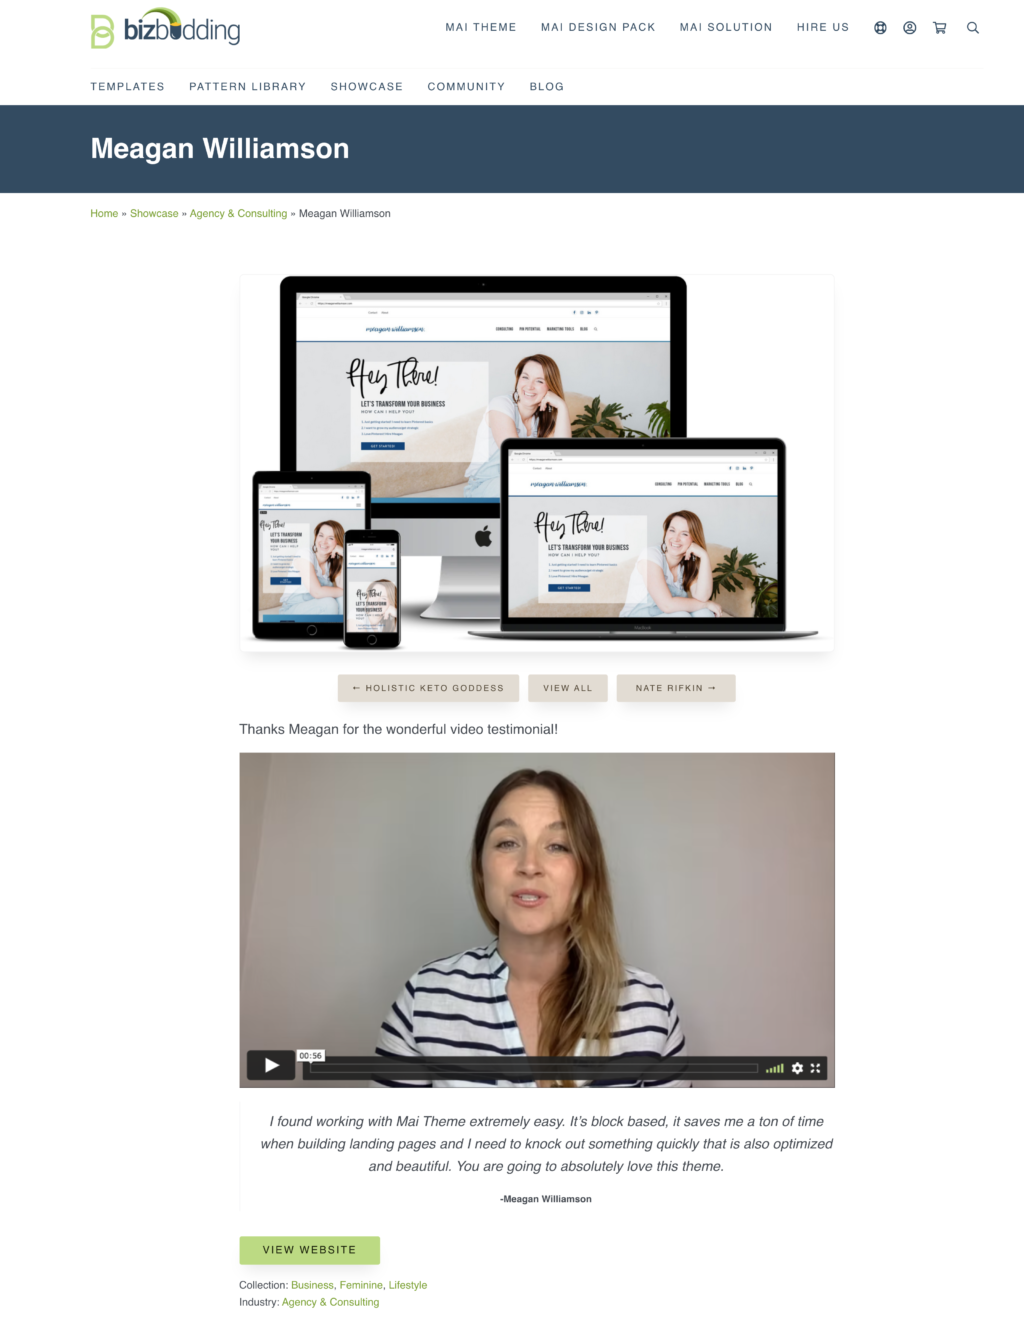 BizBudding client showcase page with video testimonial on website